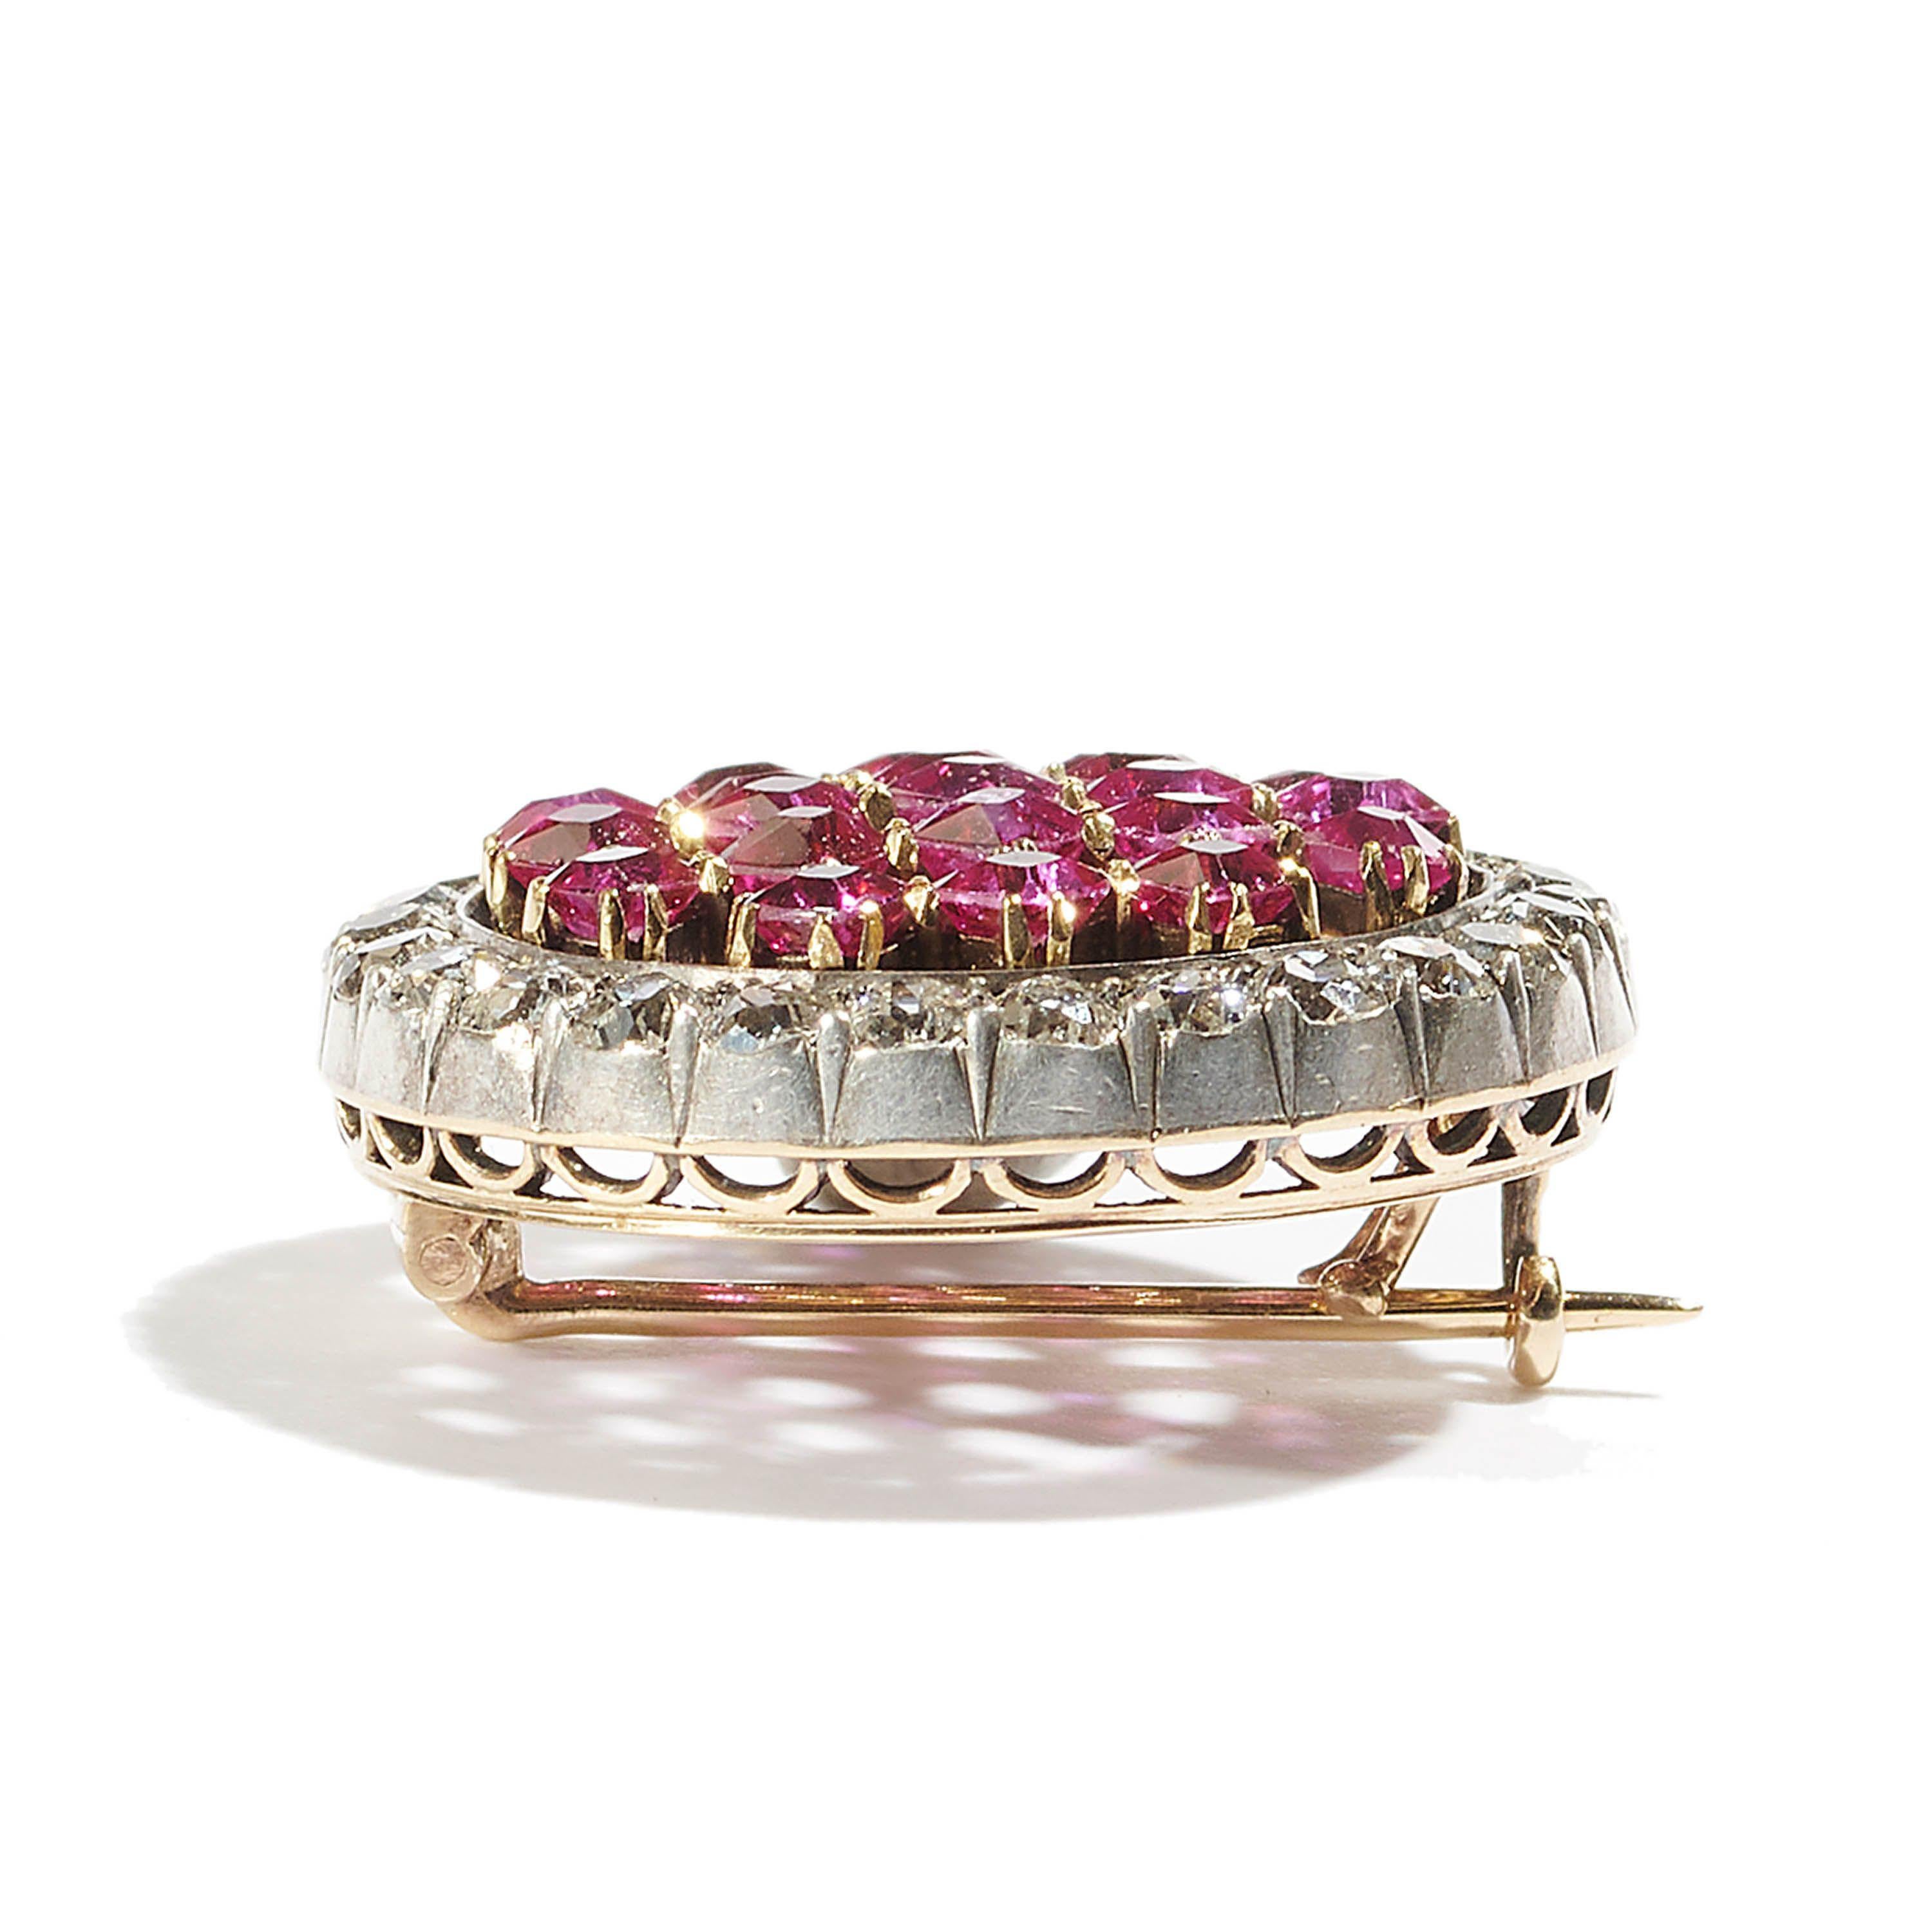 An antique, Austrian, Burma ruby and diamond chequerboard brooch, with French-cut rubies, in claw settings, surrounded by old-cut diamonds, in silver cut down settings, mounted in gold, with Austrian marks, circa 1890.